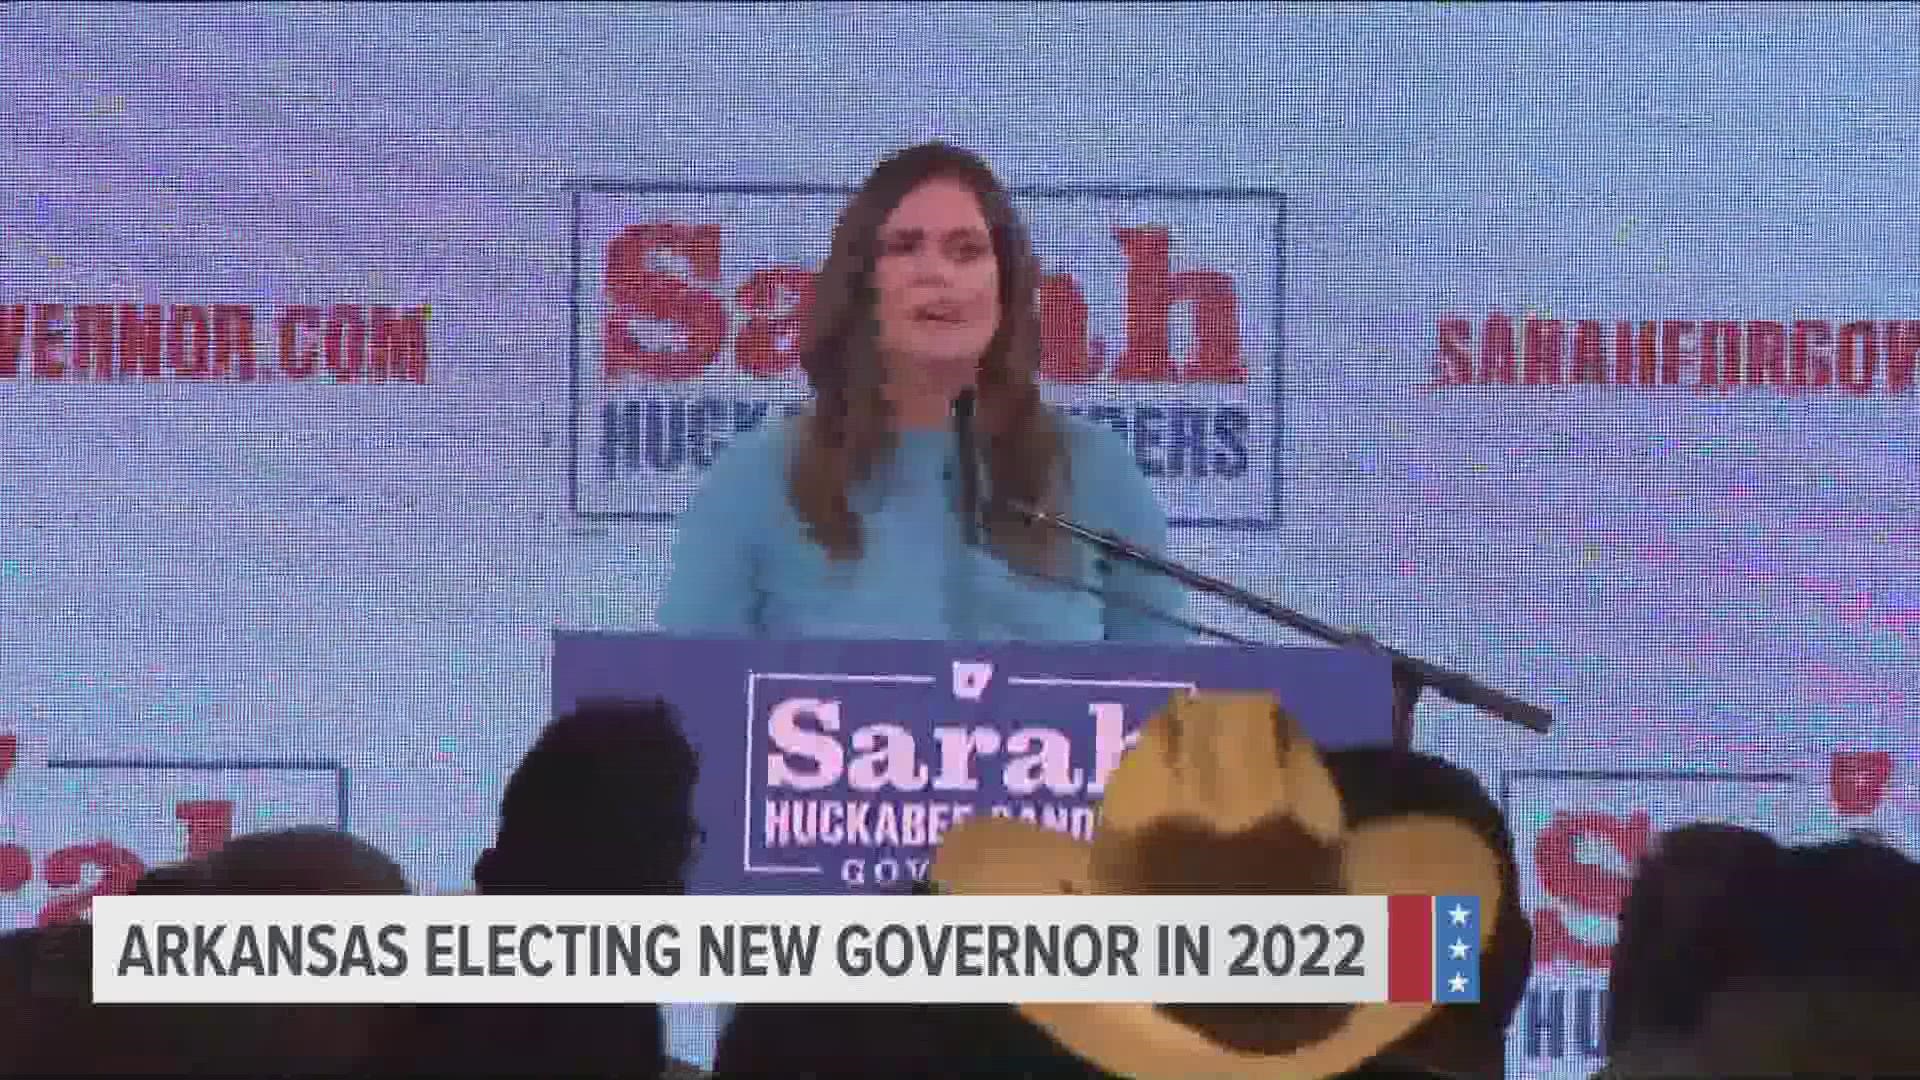 Sarah Huckabee Sanders and Chris Jones have secured the votes to be the Republican and Democratic nominees in the Arkansas governor's race.